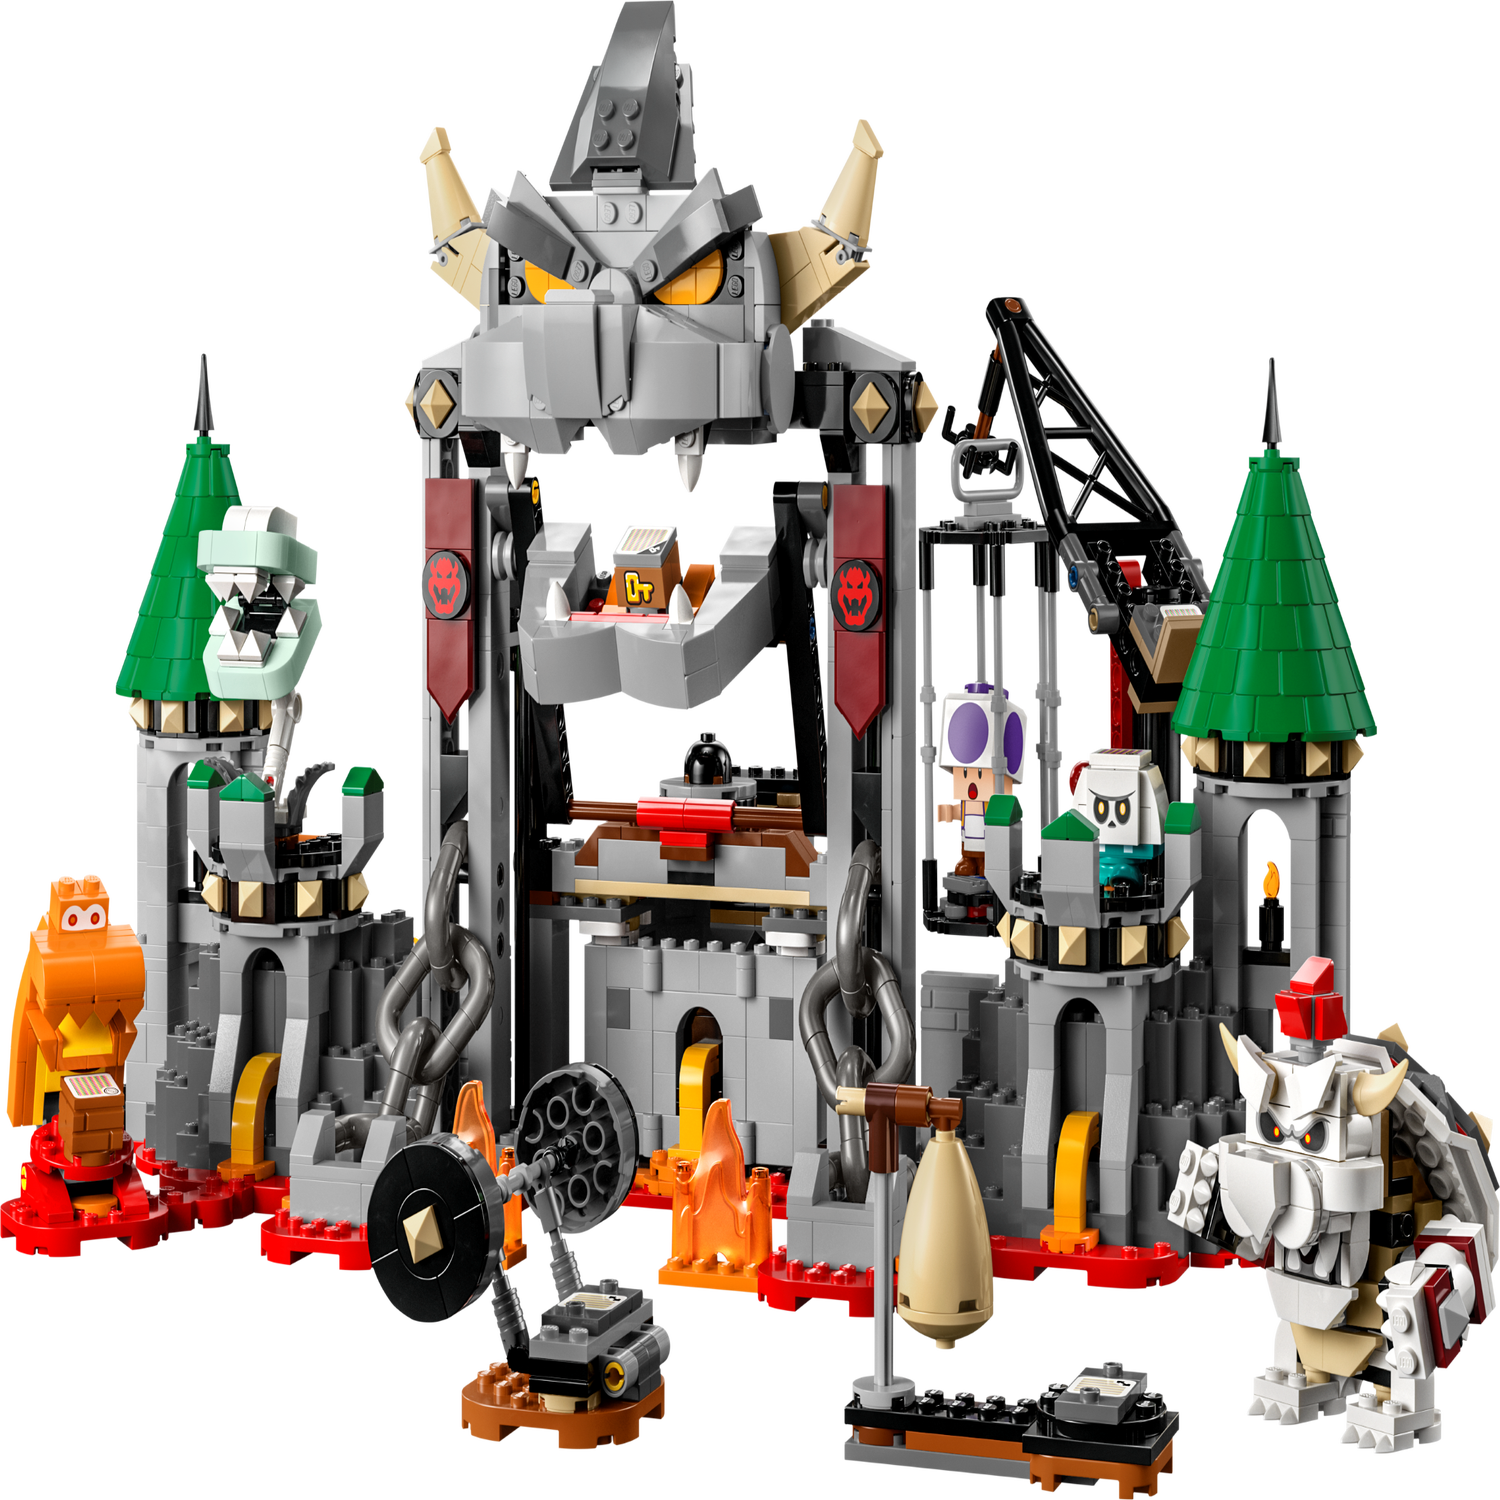 Lego's latest Super Mario set is Dry Bowser Castle and it's out in